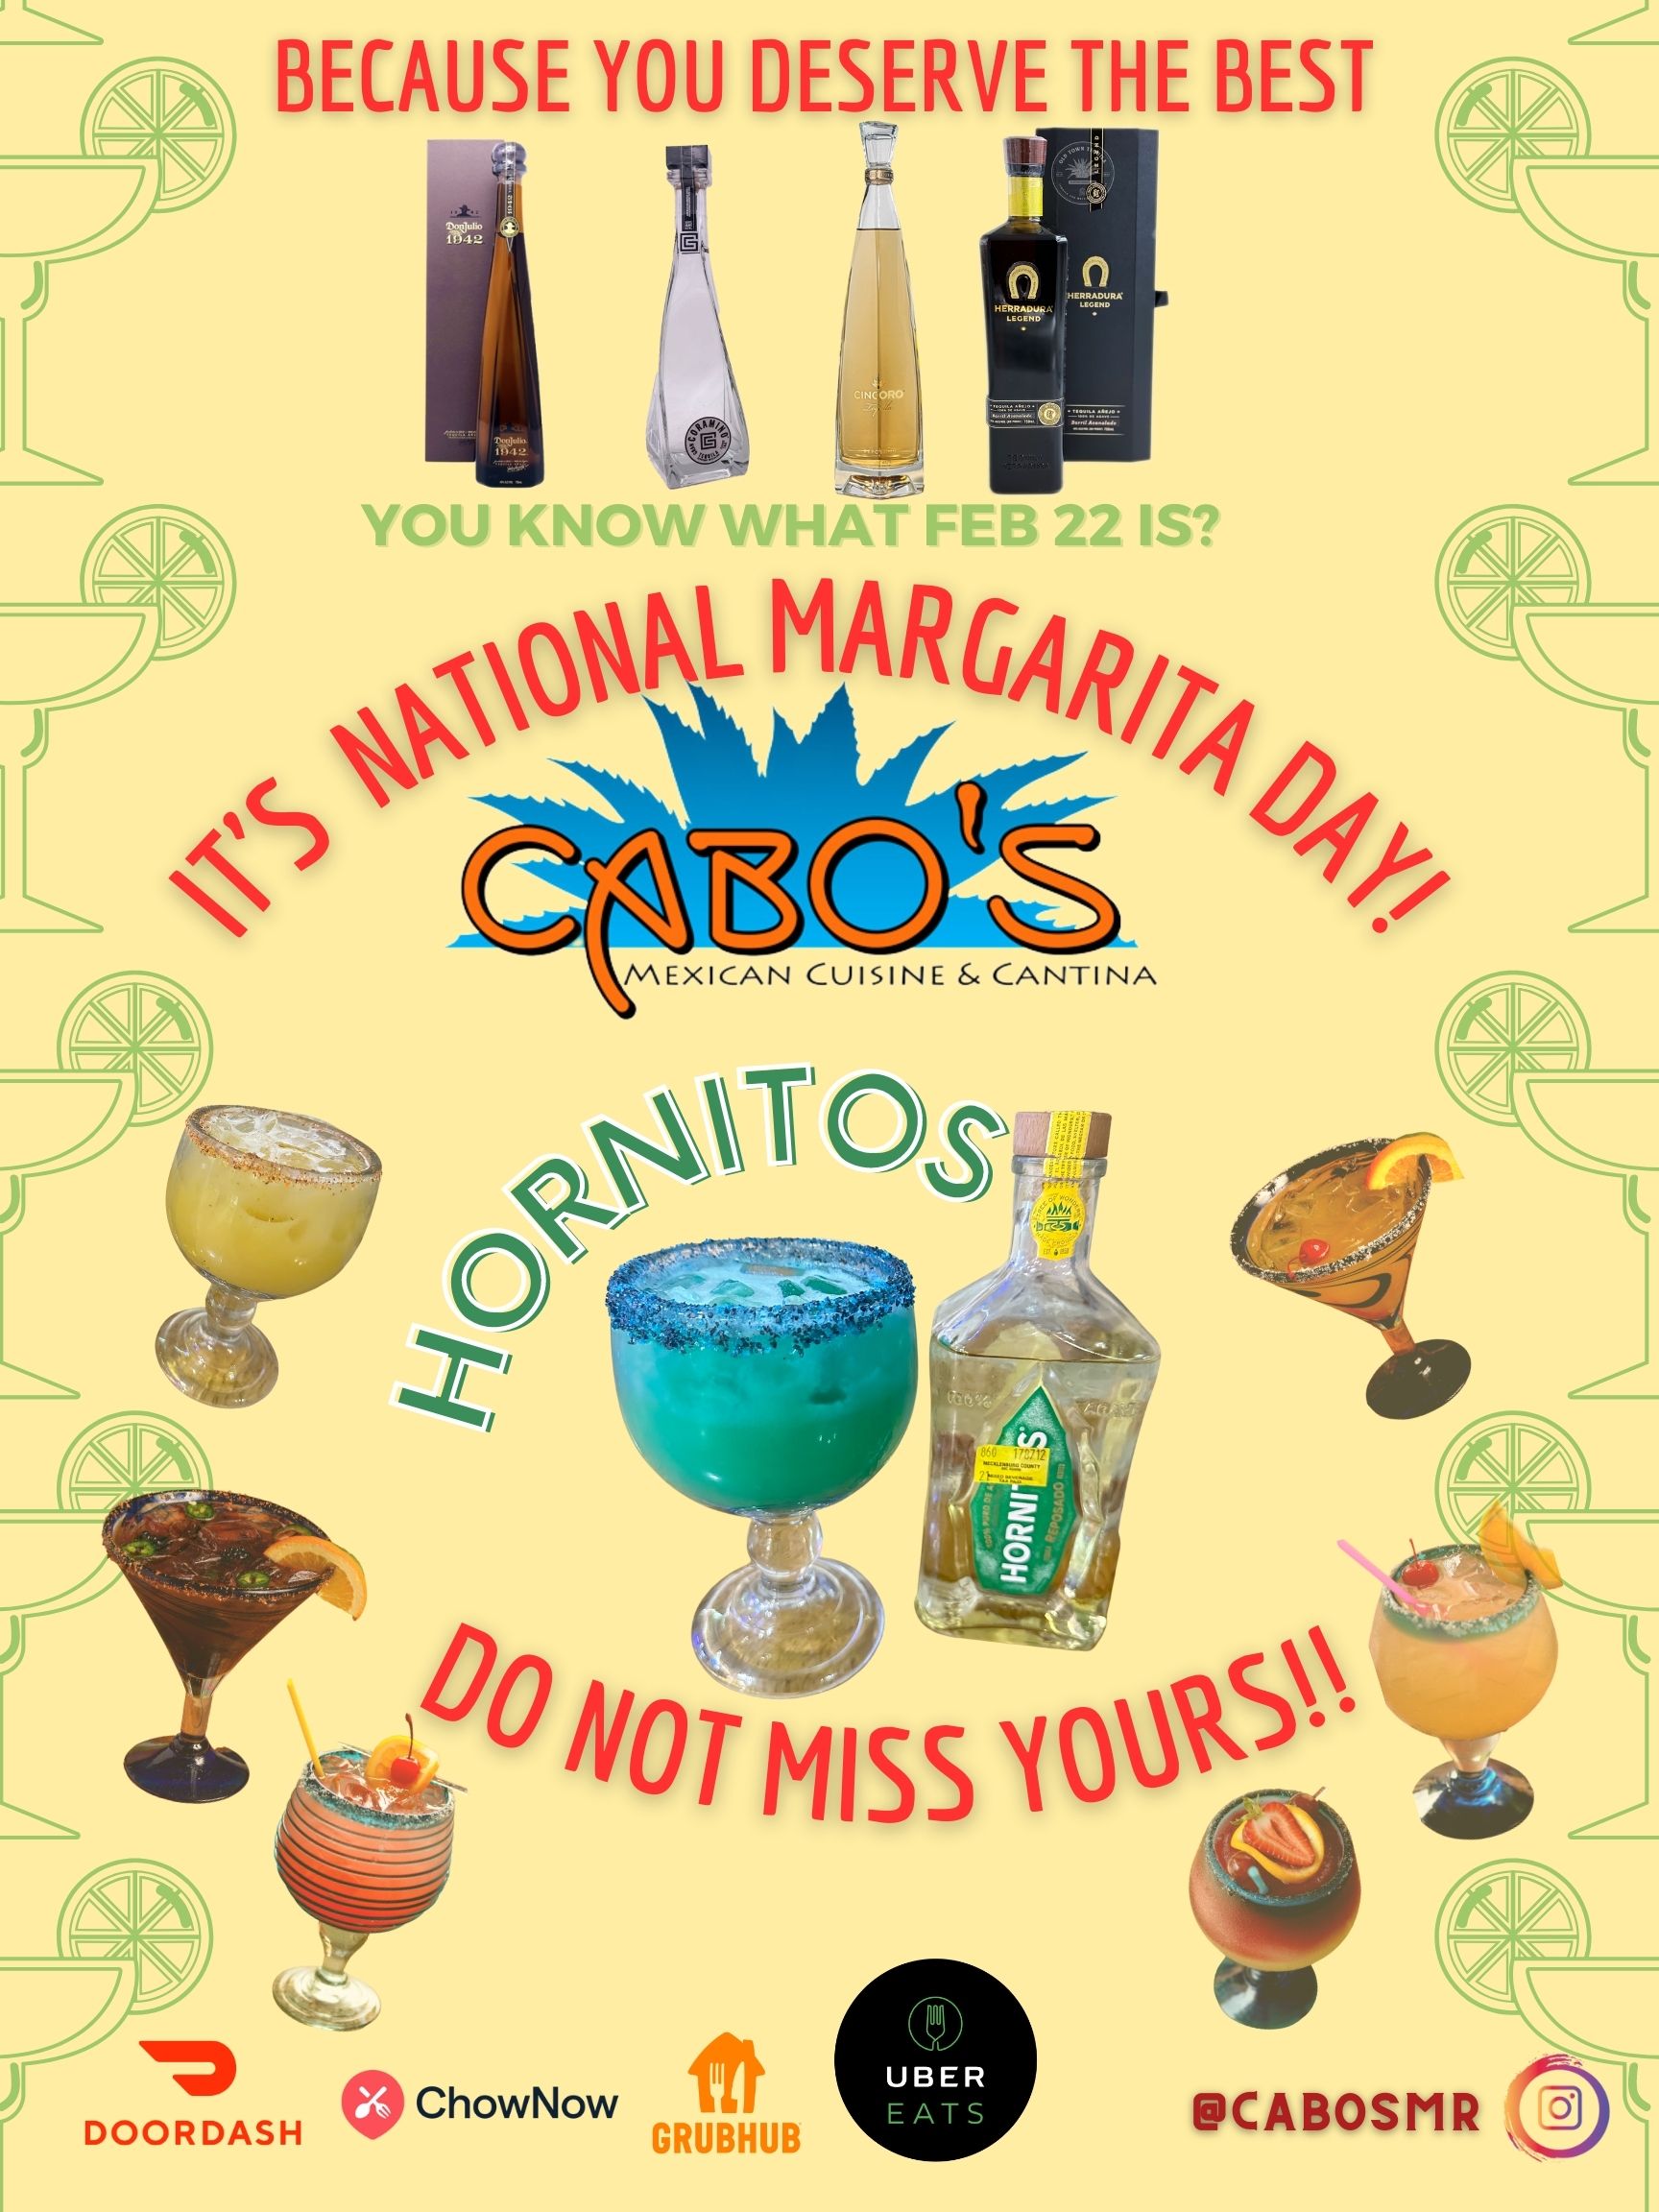 Come celebrate National Margarita day with us on February 22nd.